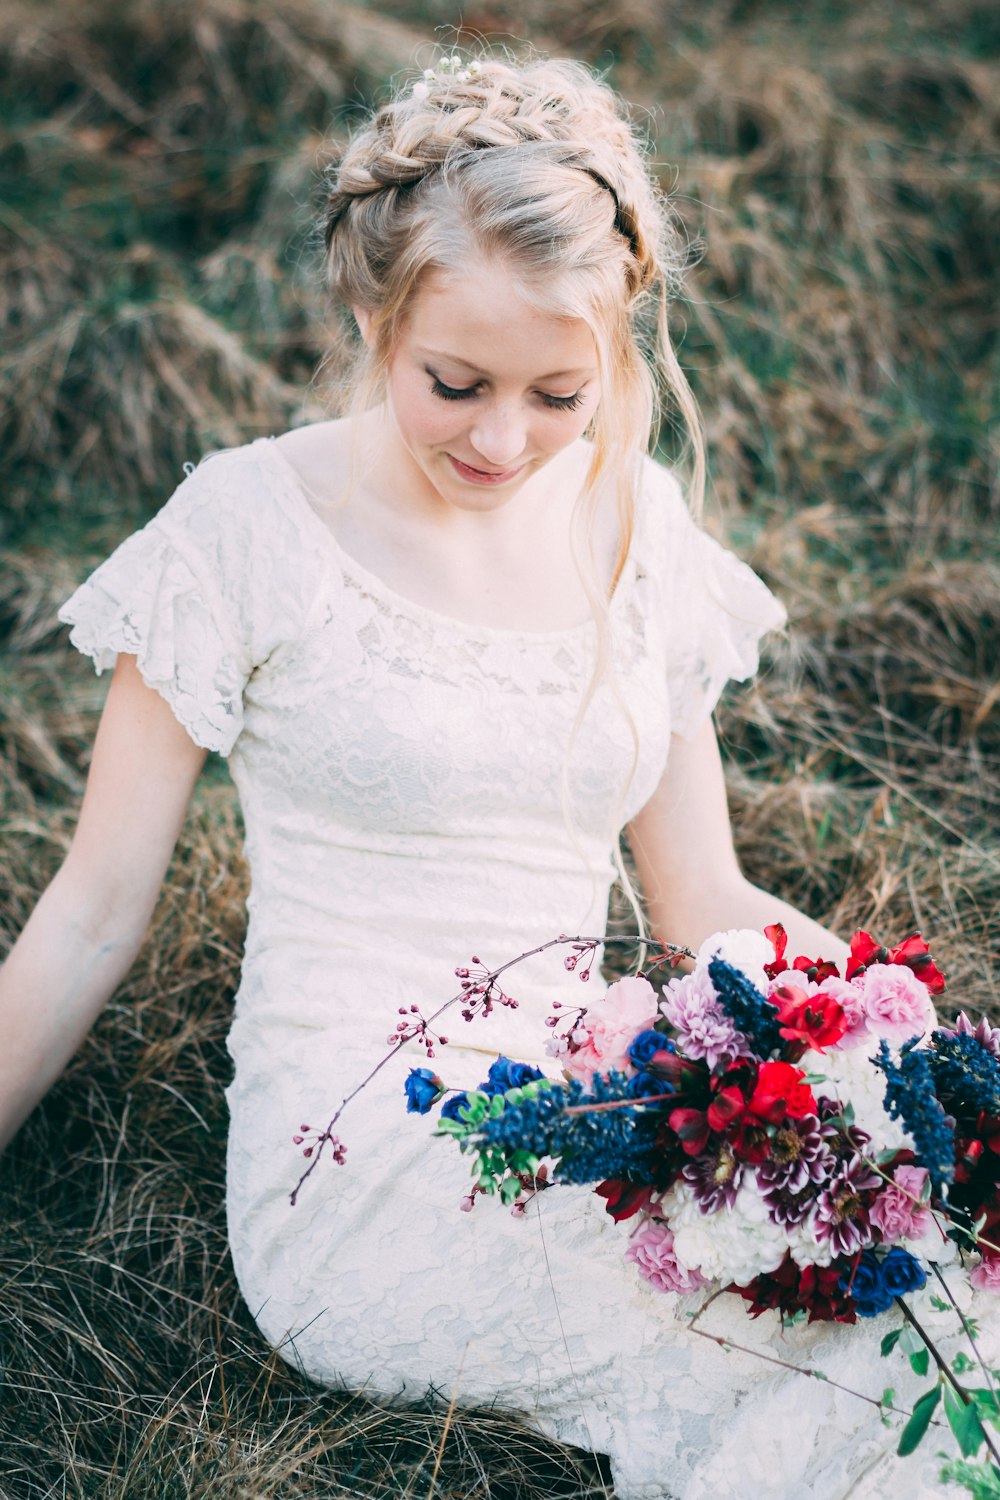 woman wearing white lace dress with flower bouquet sitting on grass at daytime